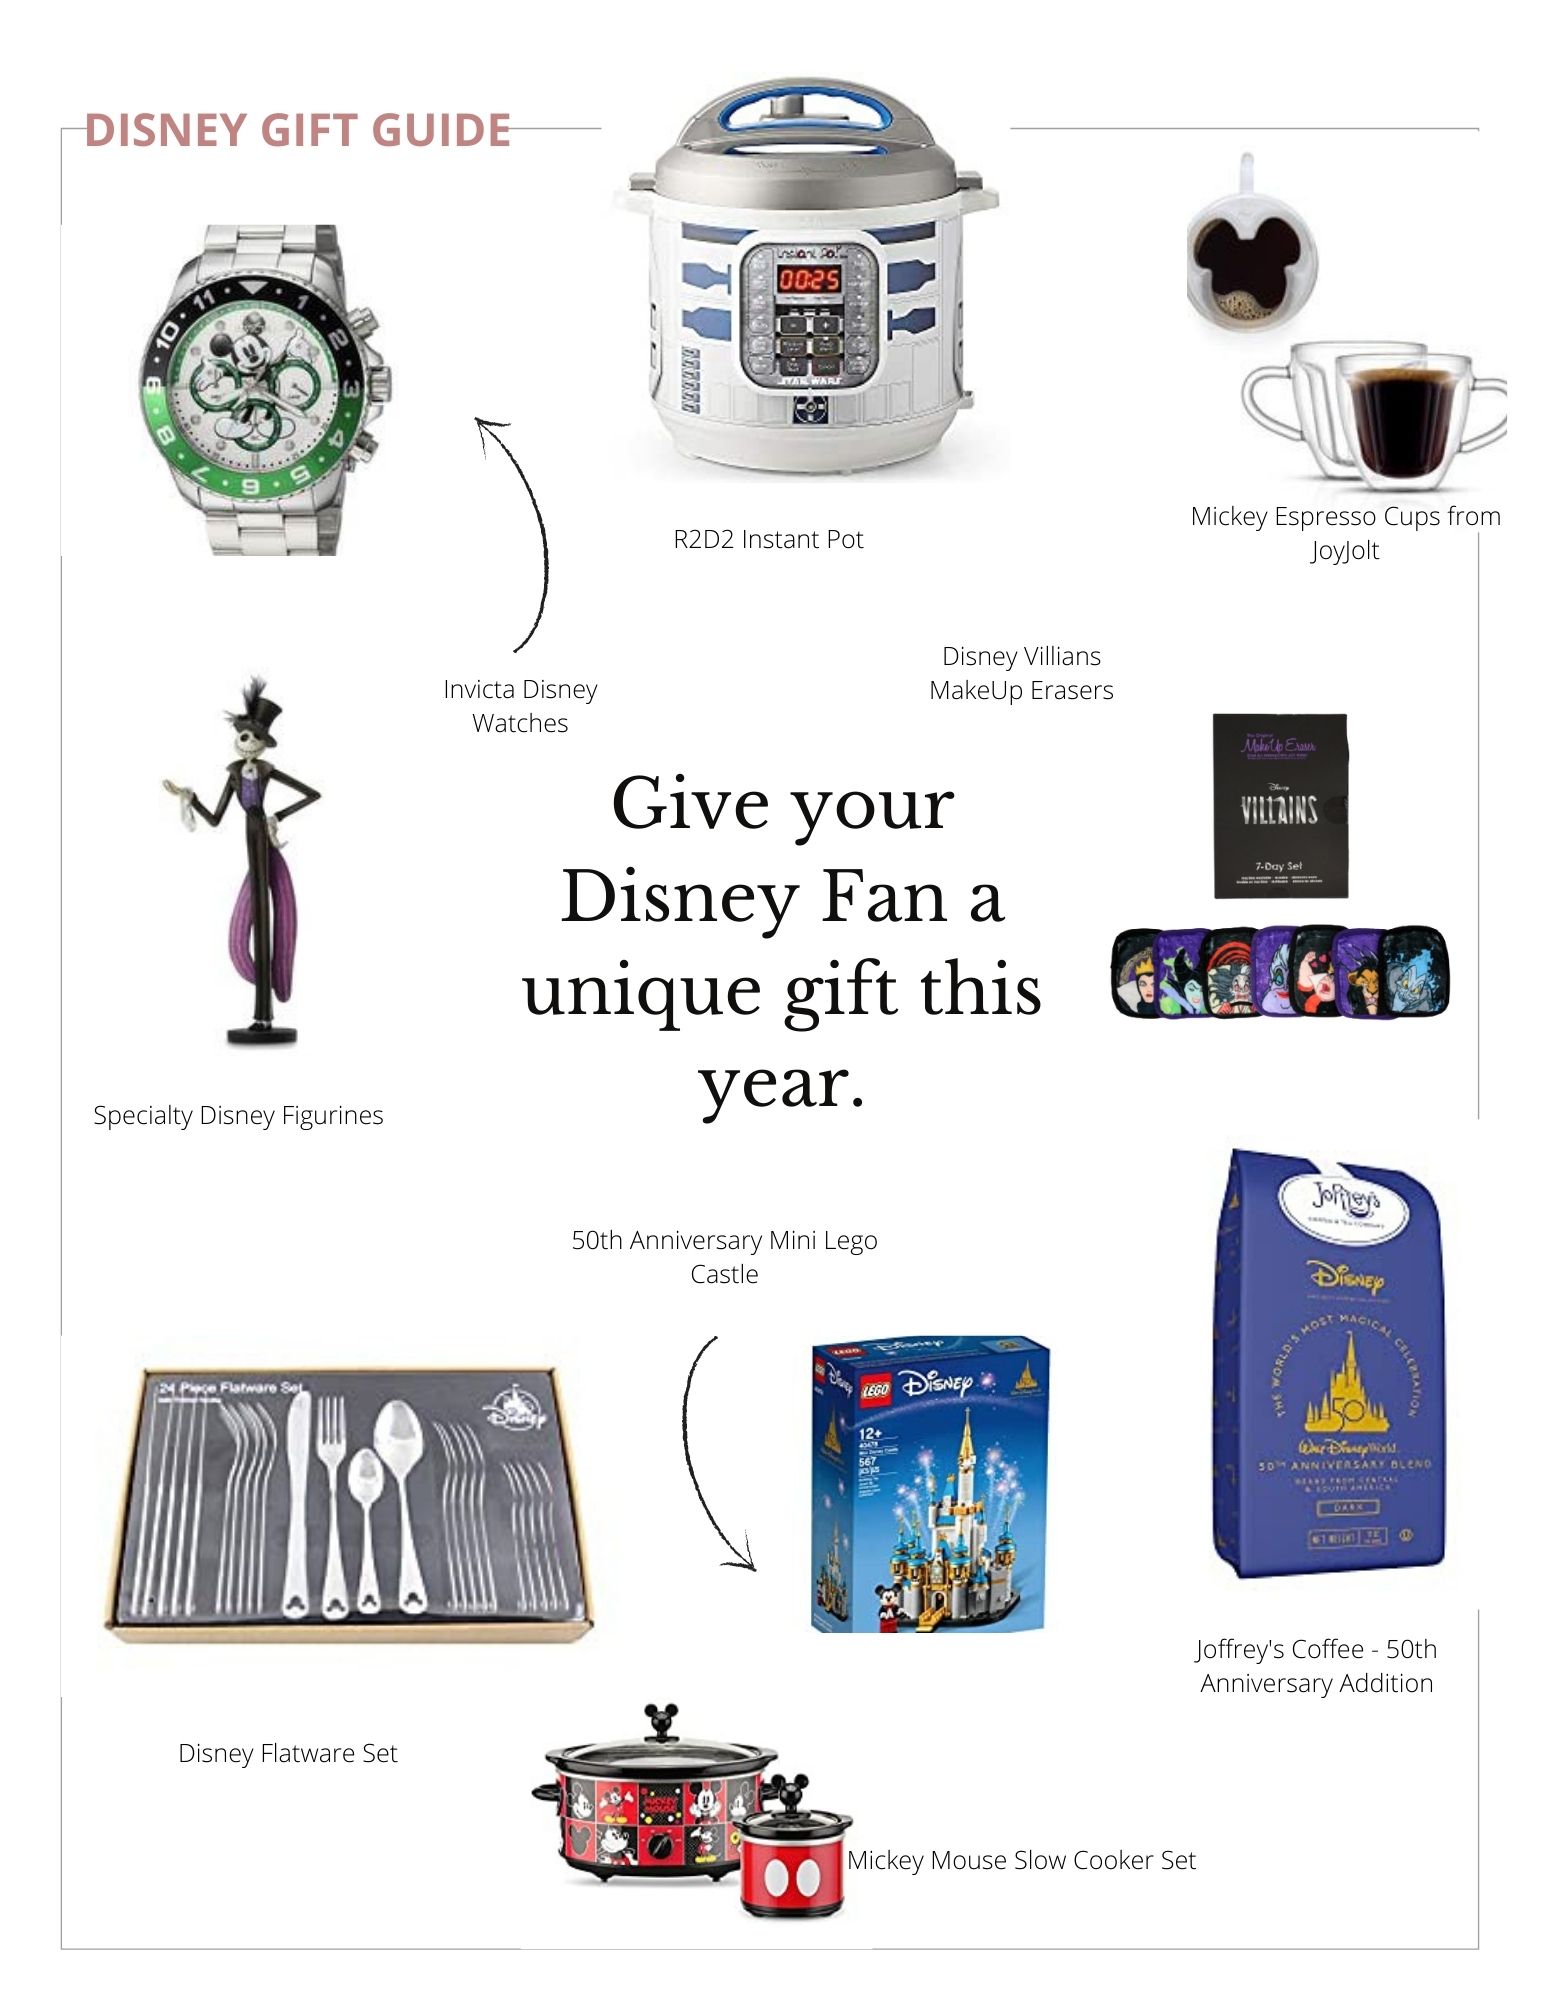 https://mommysmoviemagic.com/wp-content/uploads/2021/11/Copy-of-NS-Gift-Guide-Full-Size.jpg